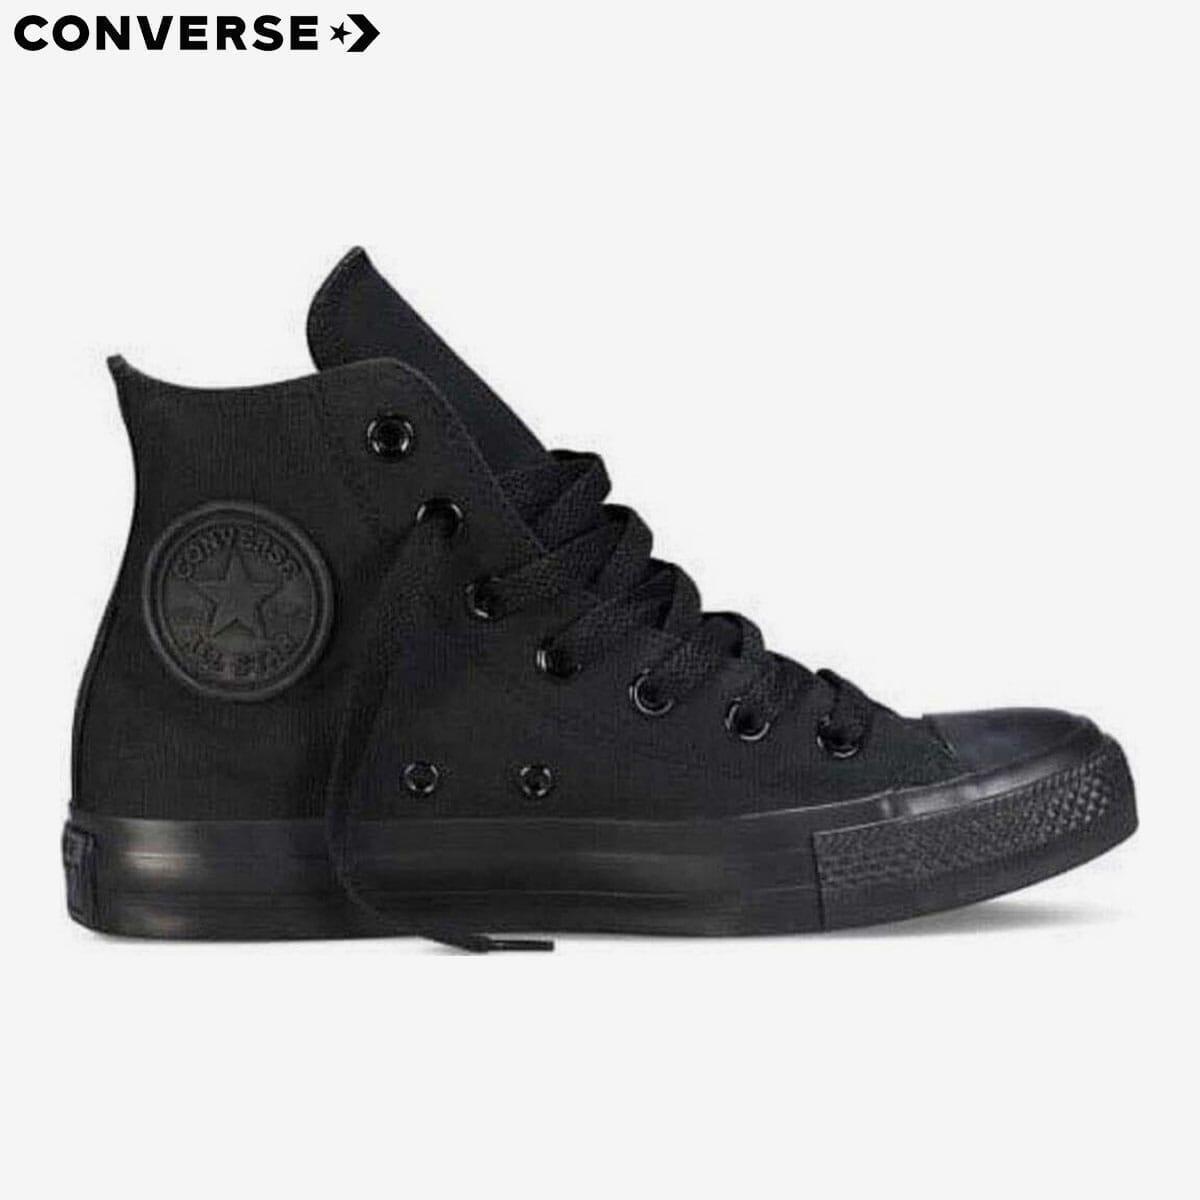 converse black m3310 chuck taylor all star high top sneakers for